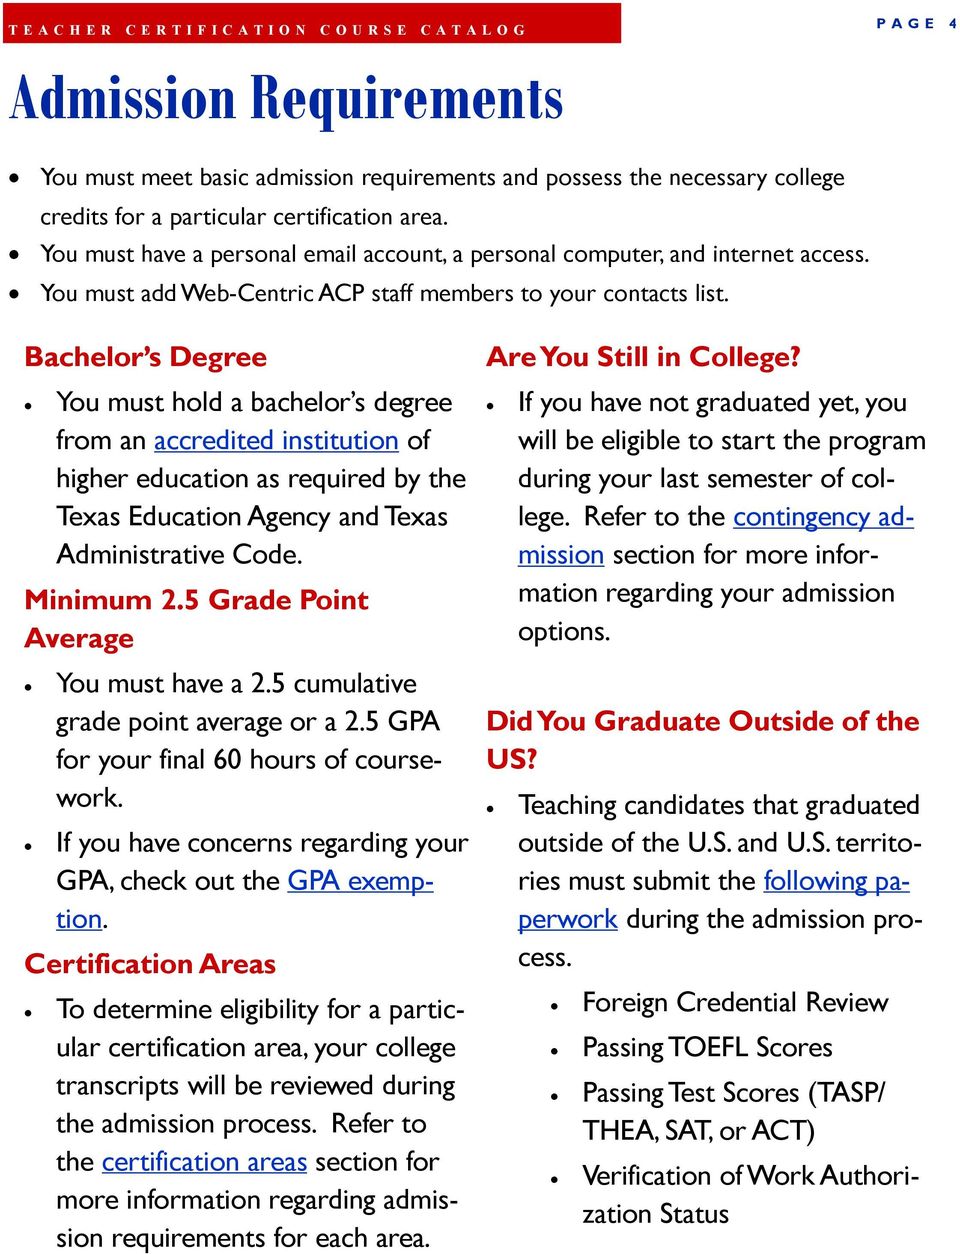 Bachelor s Degree You must hold a bachelor s degree from an accredited institution of higher education as required by the Texas Education Agency and Texas Administrative Code. Minimum 2.